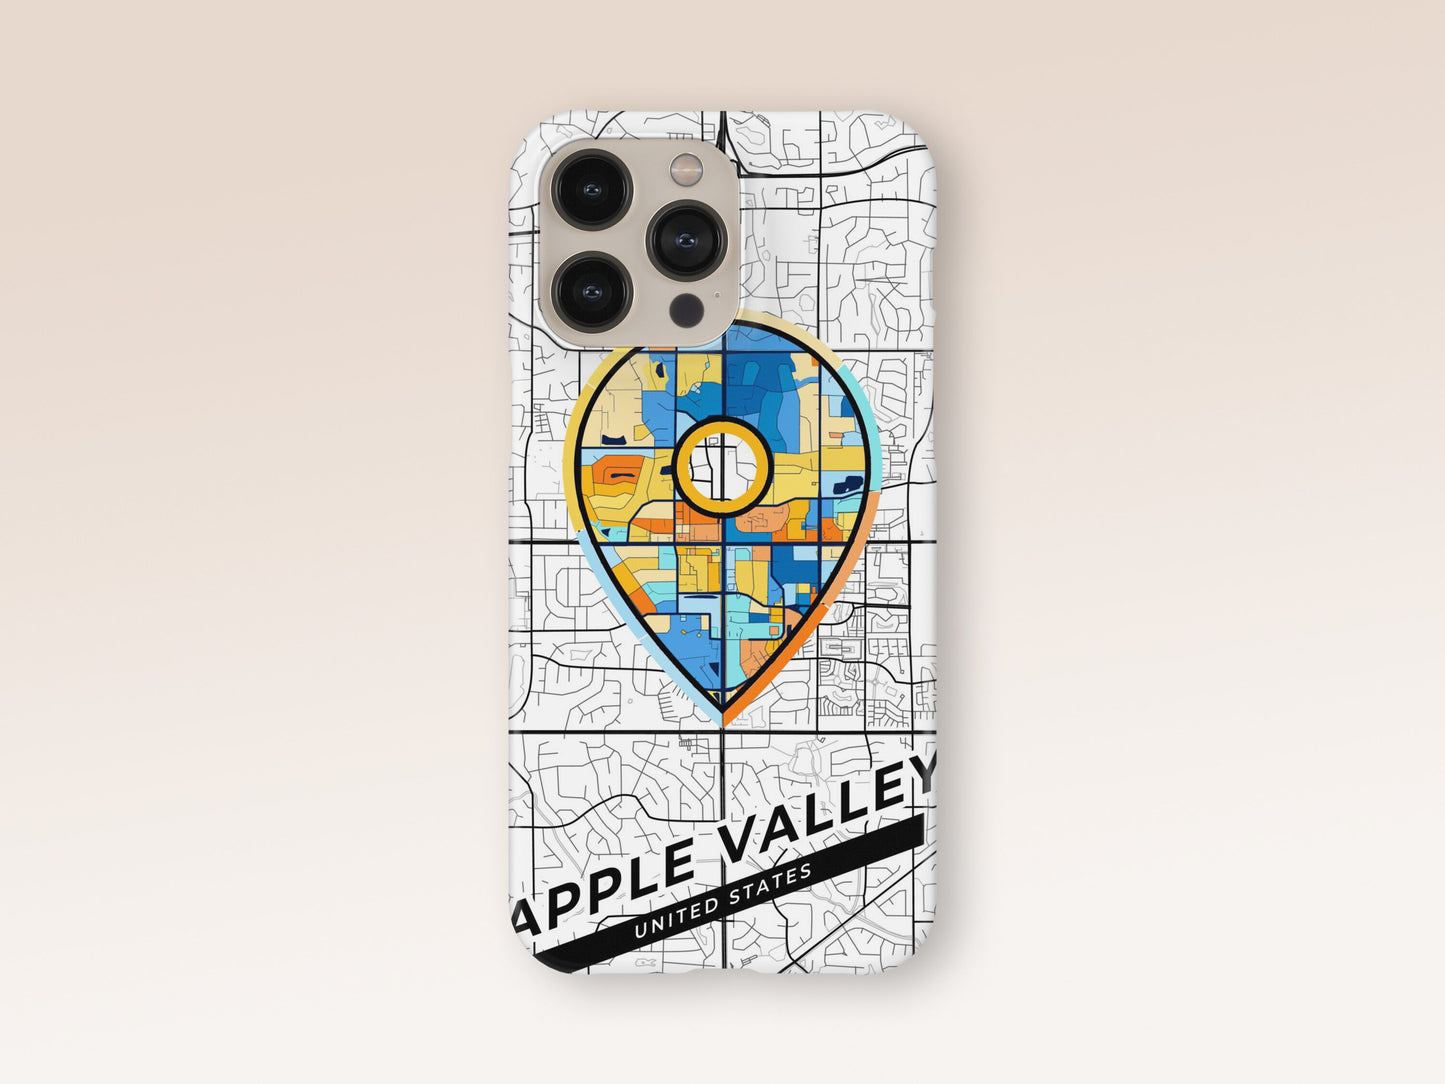 Apple Valley Minnesota slim phone case with colorful icon. Birthday, wedding or housewarming gift. Couple match cases. 1